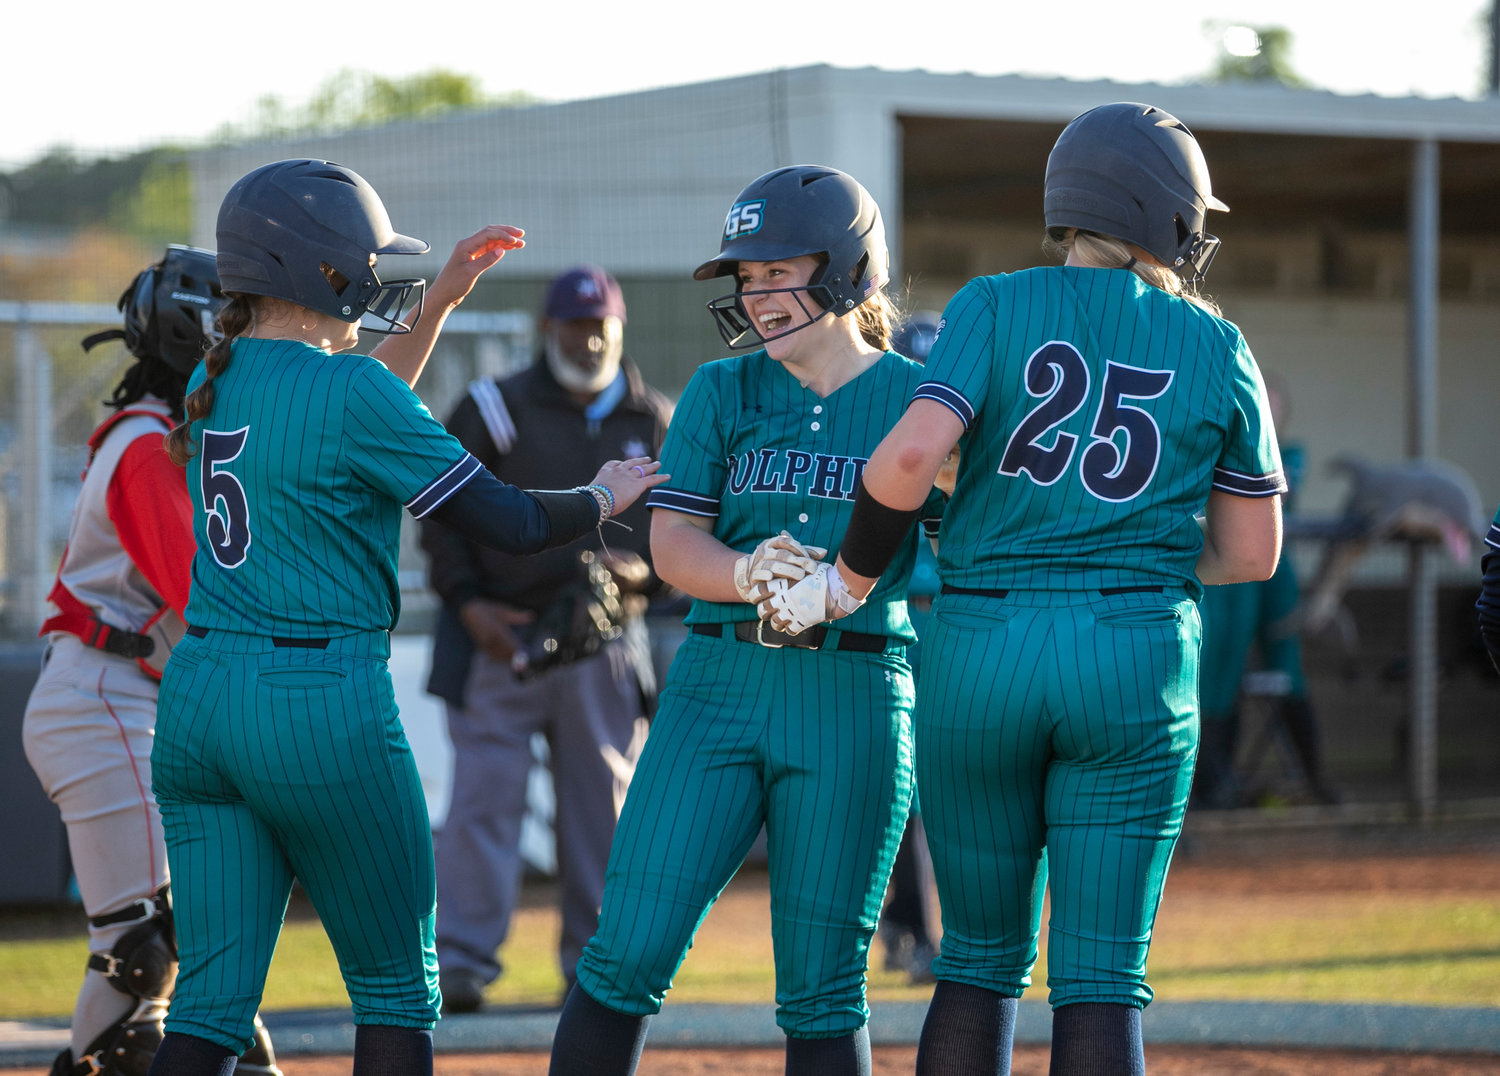 Gulf Shores eighth-grader Kayleigh Jacks celebrates her grand slam with freshman Anna-Leigh Price (5) and junior Emily Smith (25) during the Dolphins’ Class 5A Area 1 doubleheader against B.C. Rain at home March 21. After a 4-0 start, Gulf Shores had its final area contests scheduled earlier this week.